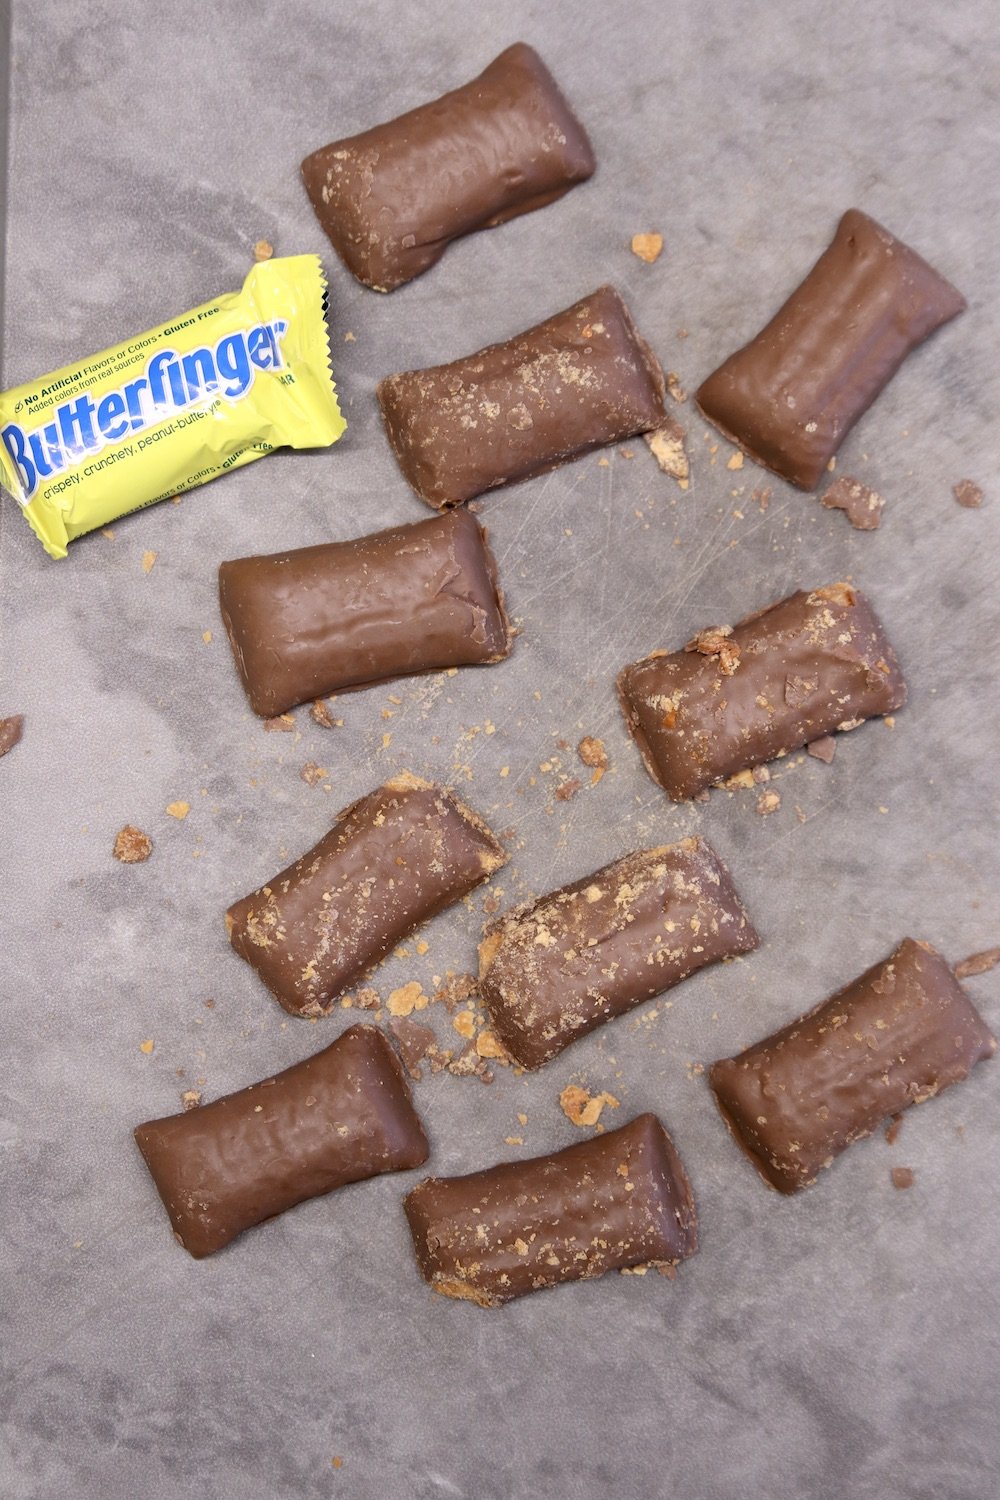 Unwrapped Butterfinger fun size candy bars, one wrapped